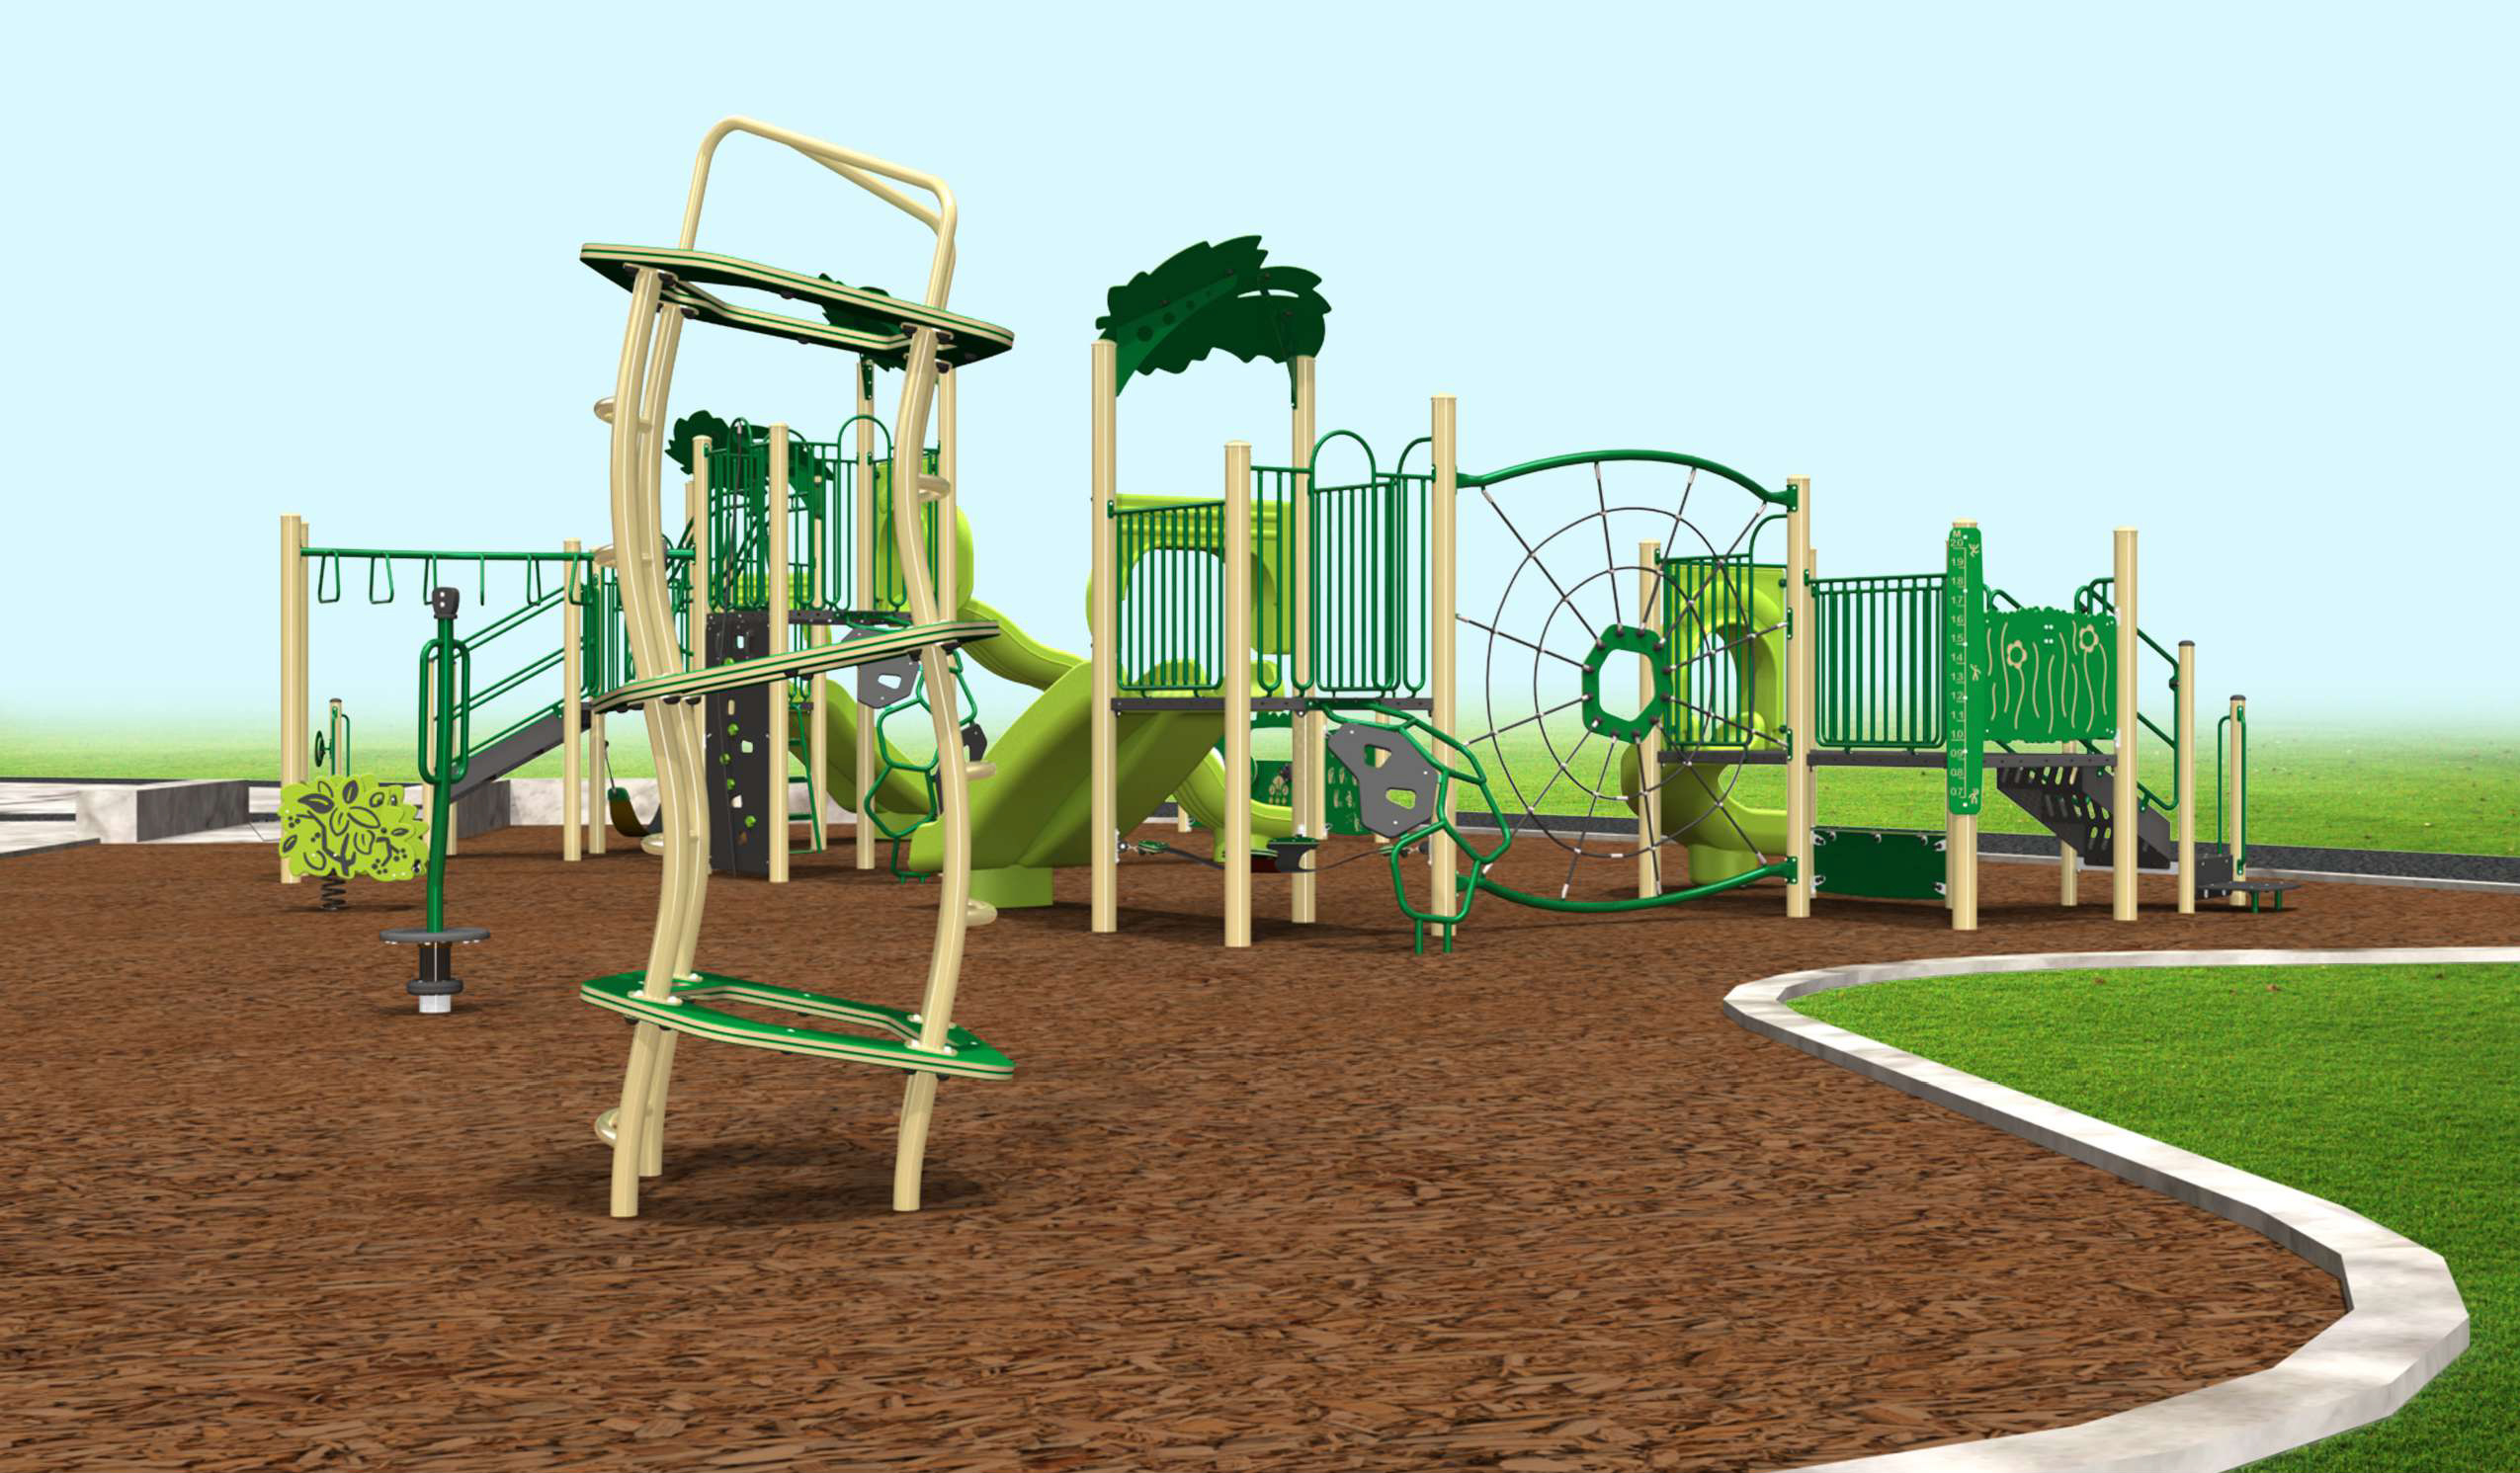 A rendering of Playground Equipment Option 1 looking towards the east at eye level. The structures are shown in beige, green, light green and grey and include the features described below